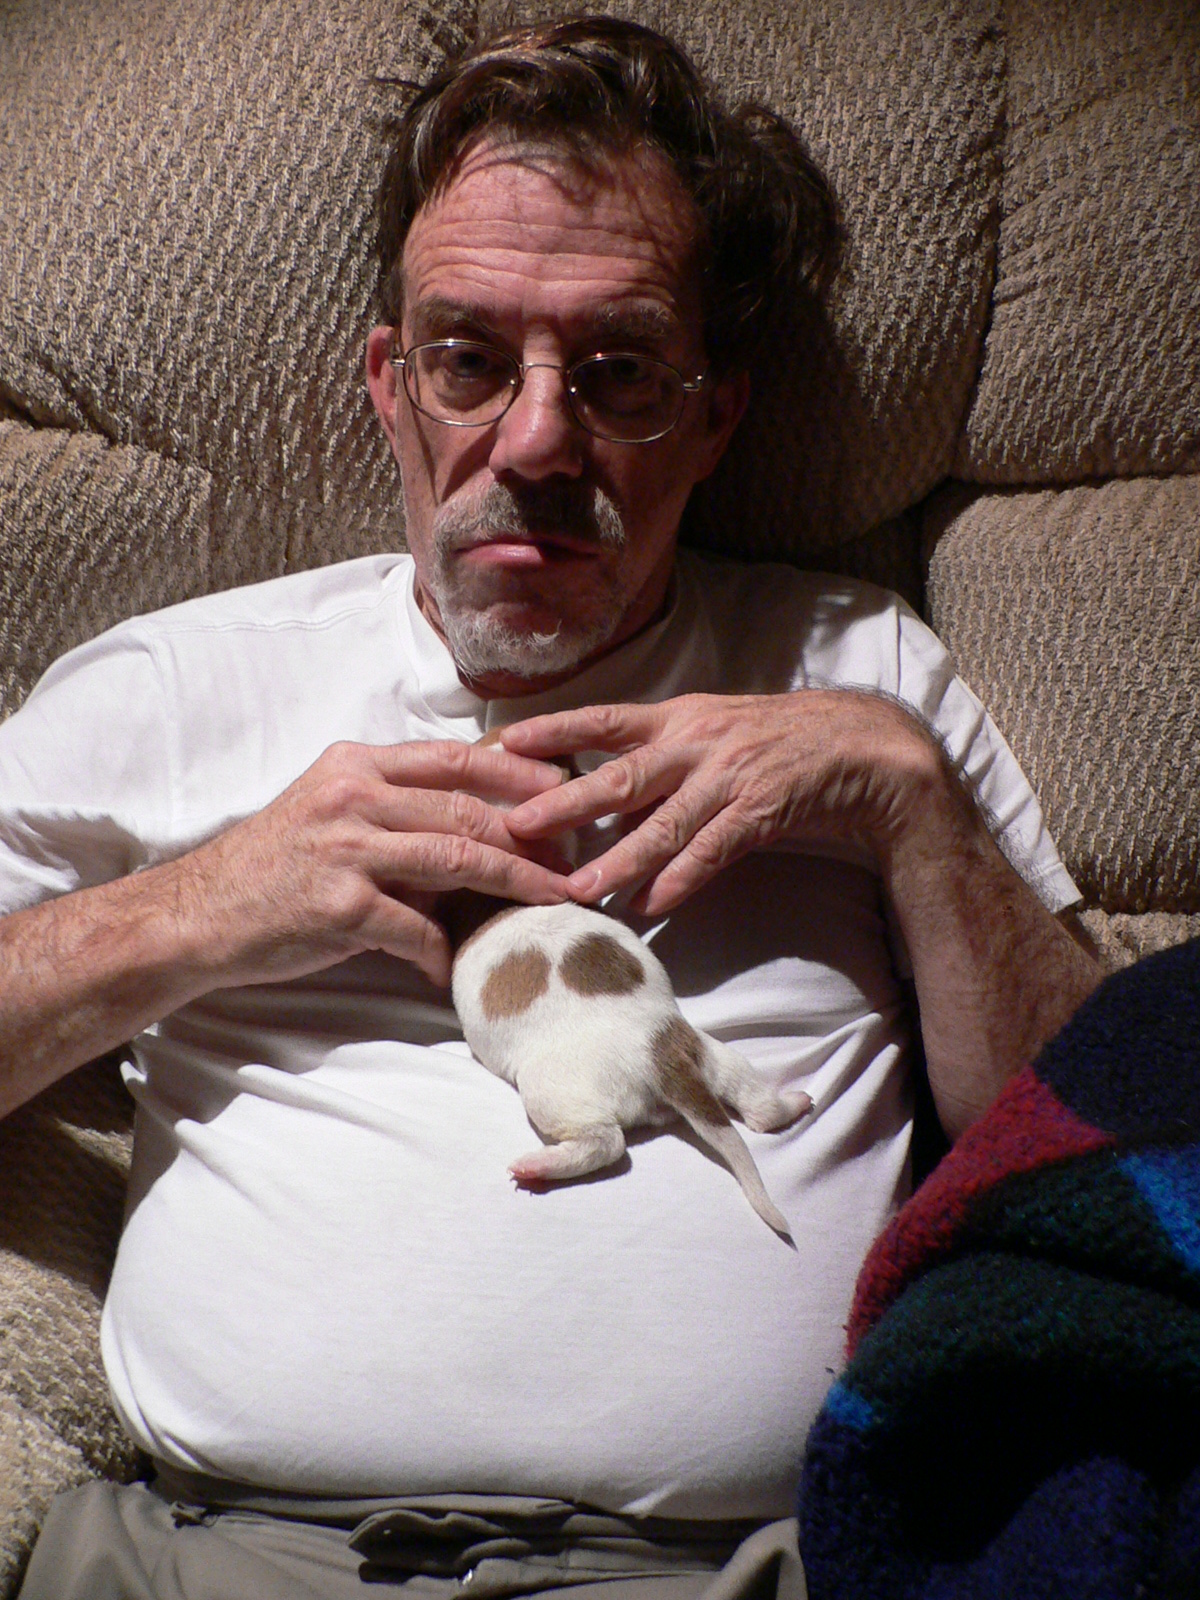 the man is holding a small white and brown puppy